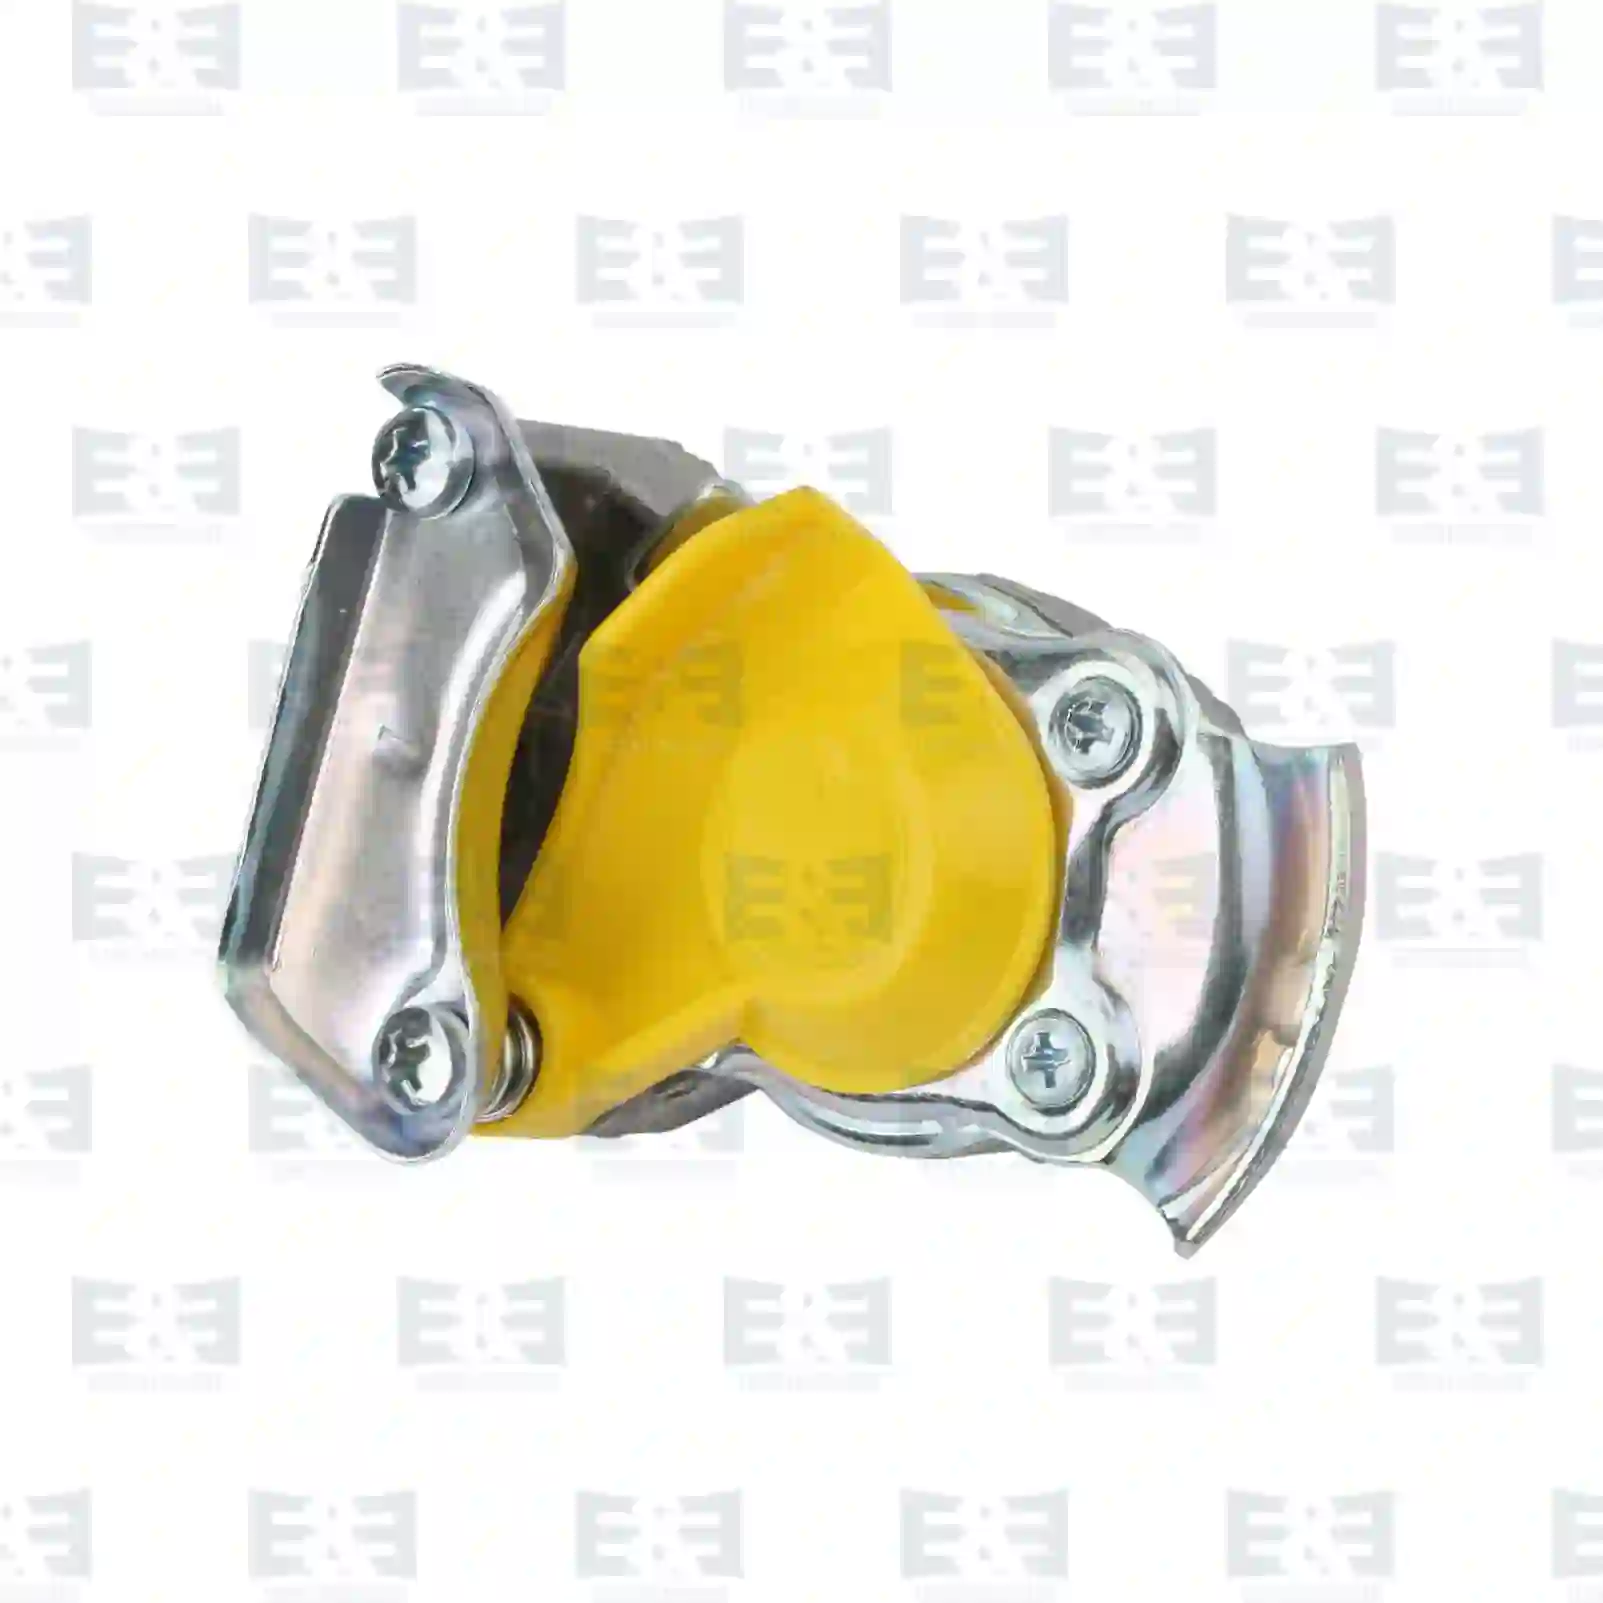  Palm coupling, yellow lid || E&E Truck Spare Parts | Truck Spare Parts, Auotomotive Spare Parts